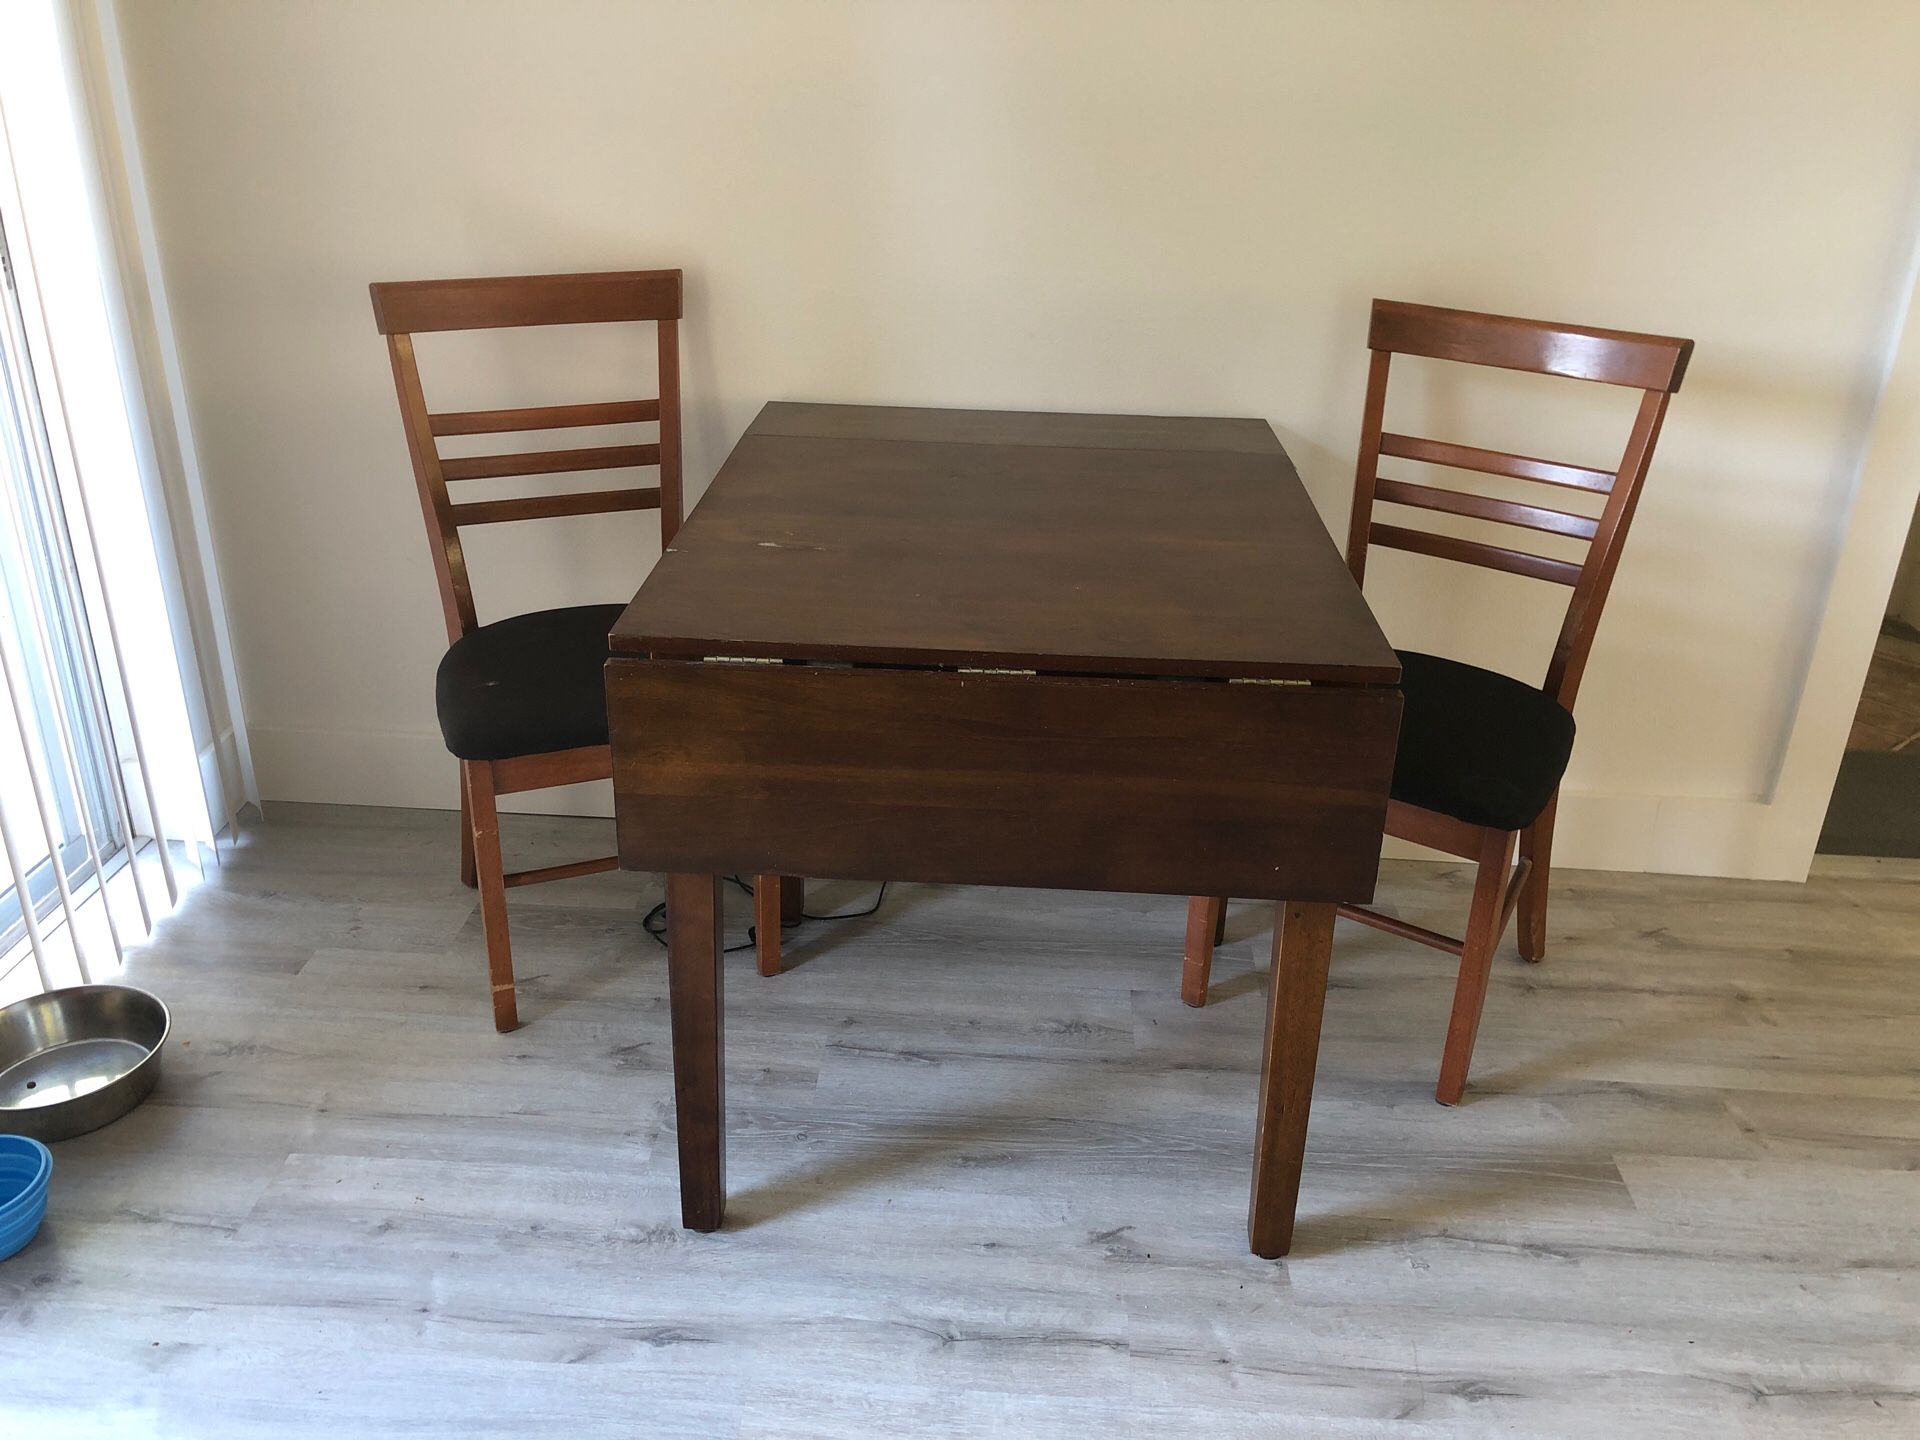 Small kitchen nook table with 2 chairs